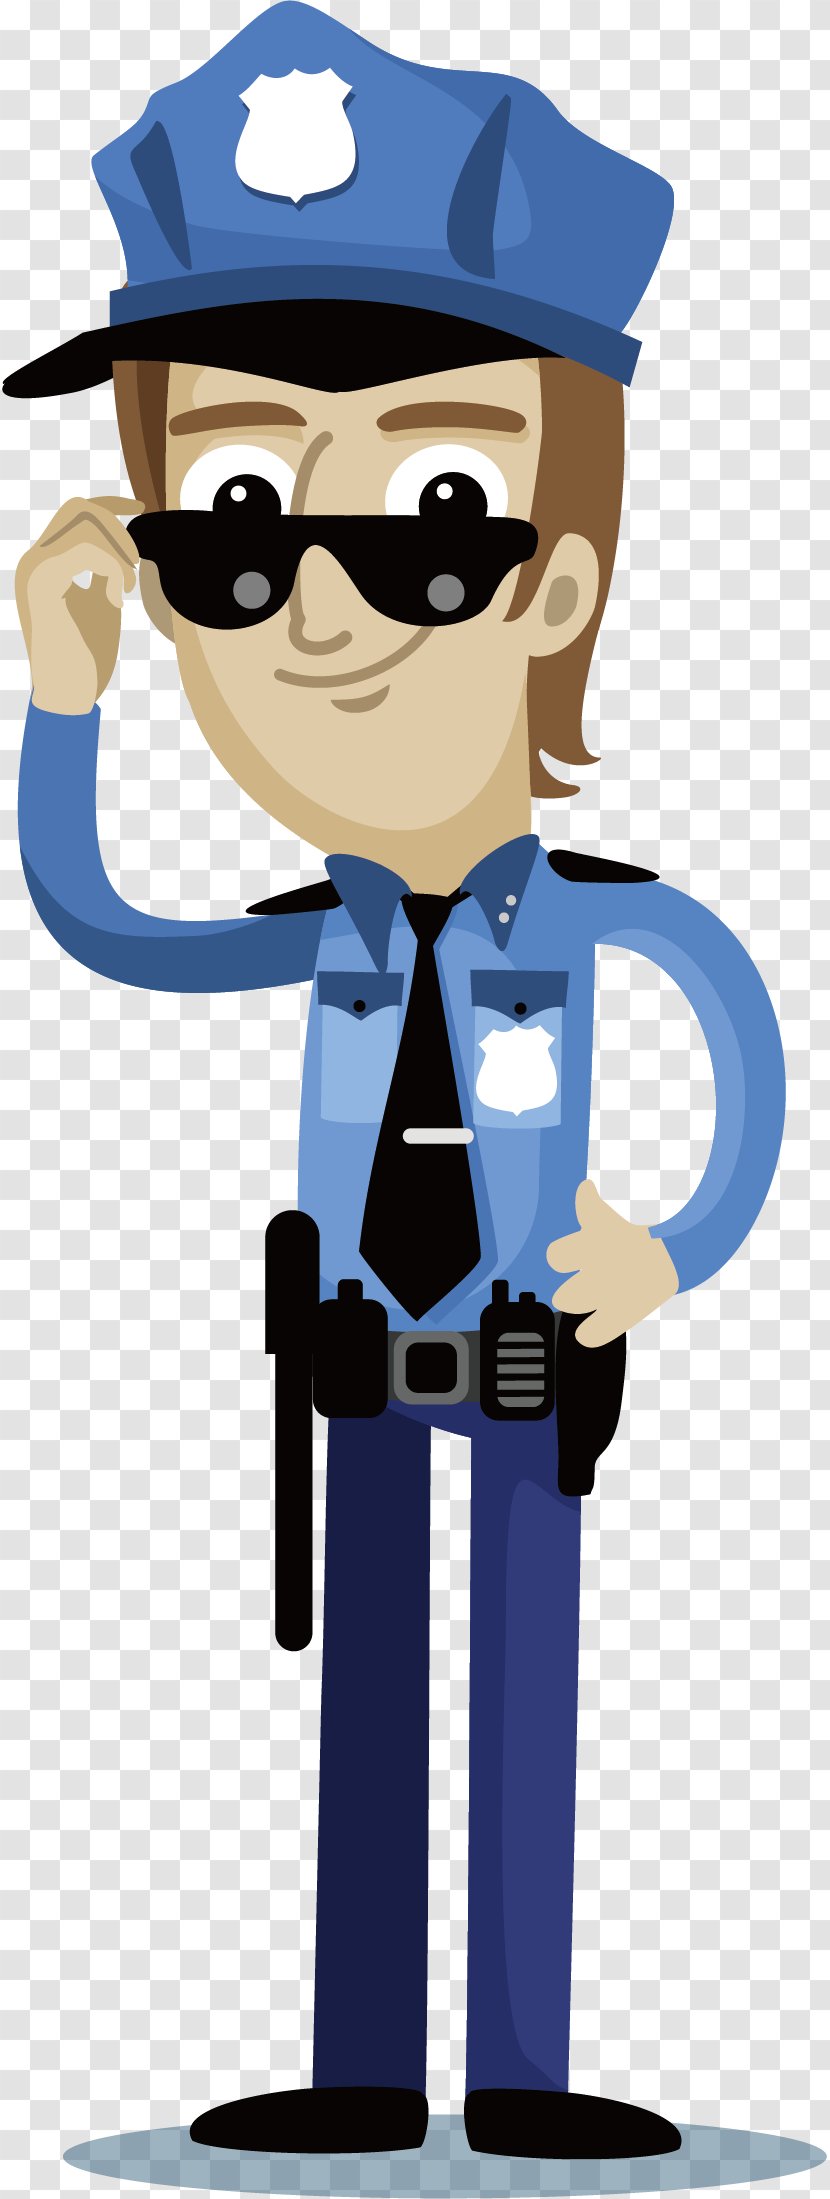 Police Officer Cartoon - Wearing Sunglasses Of The Transparent PNG